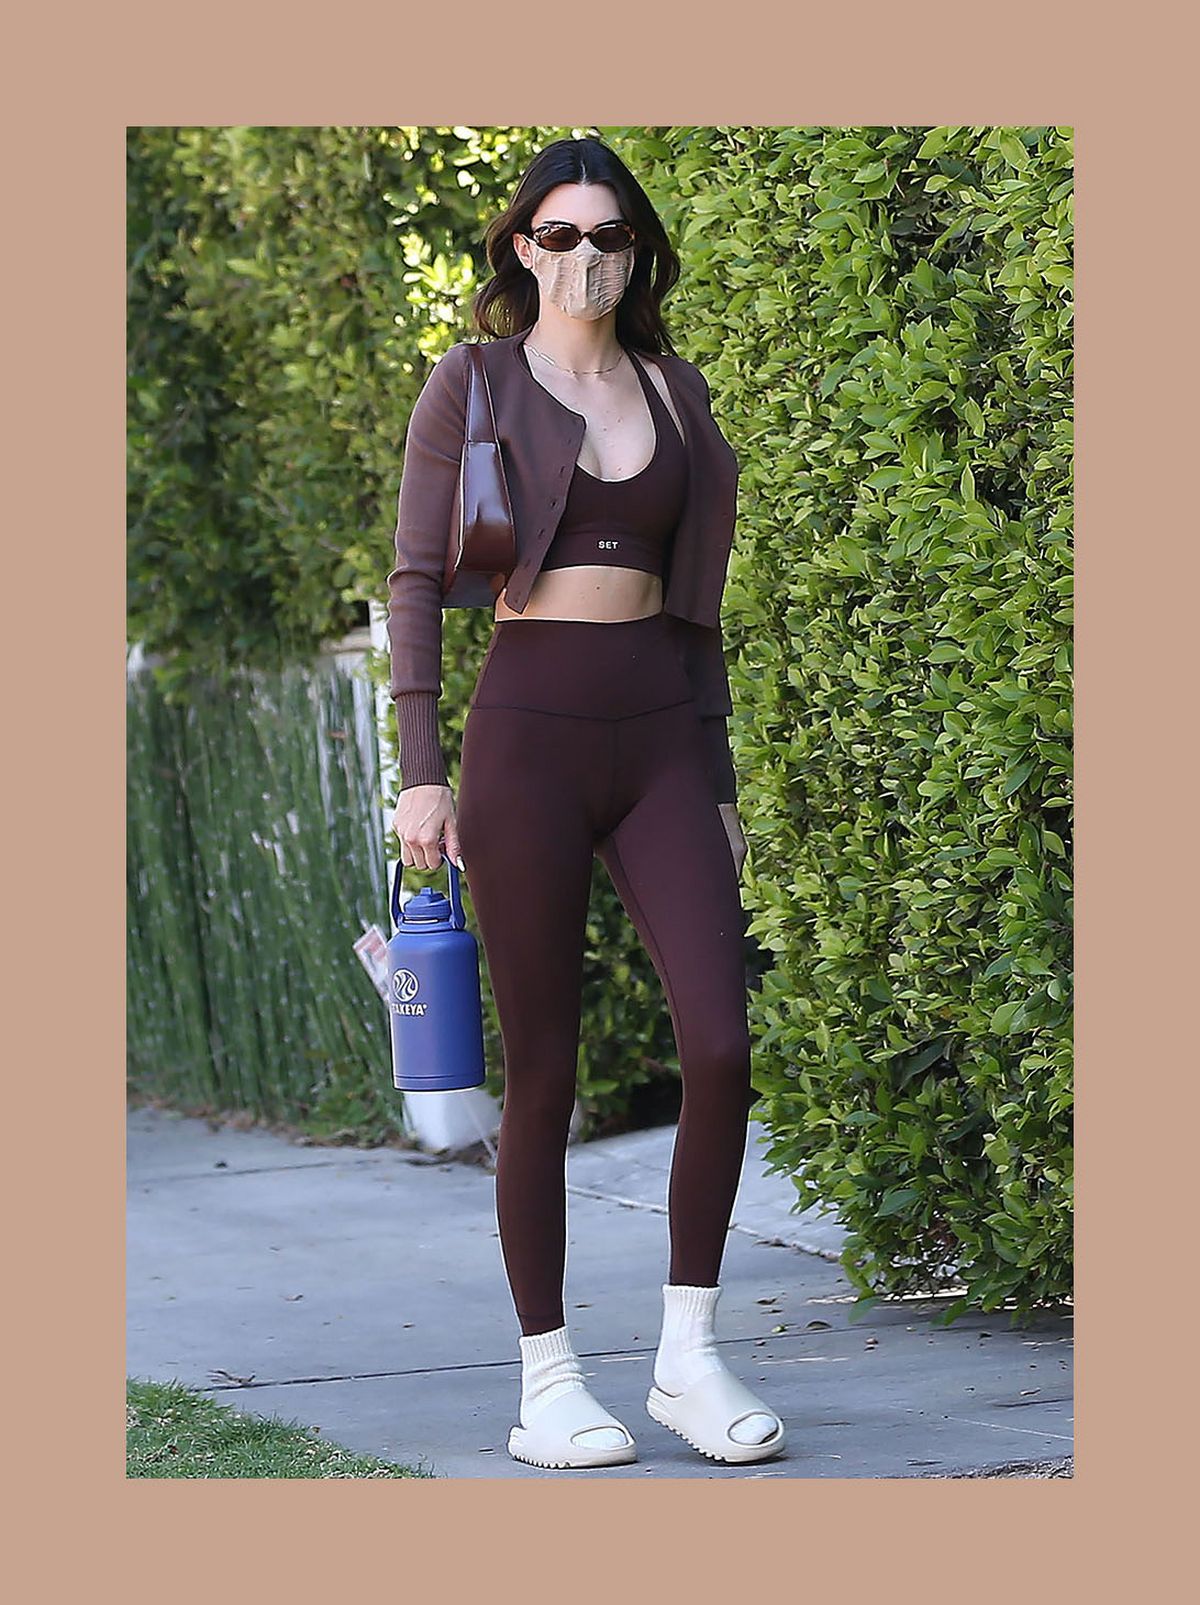 Kendall Jenner in green sports bra and green leggings on July 8